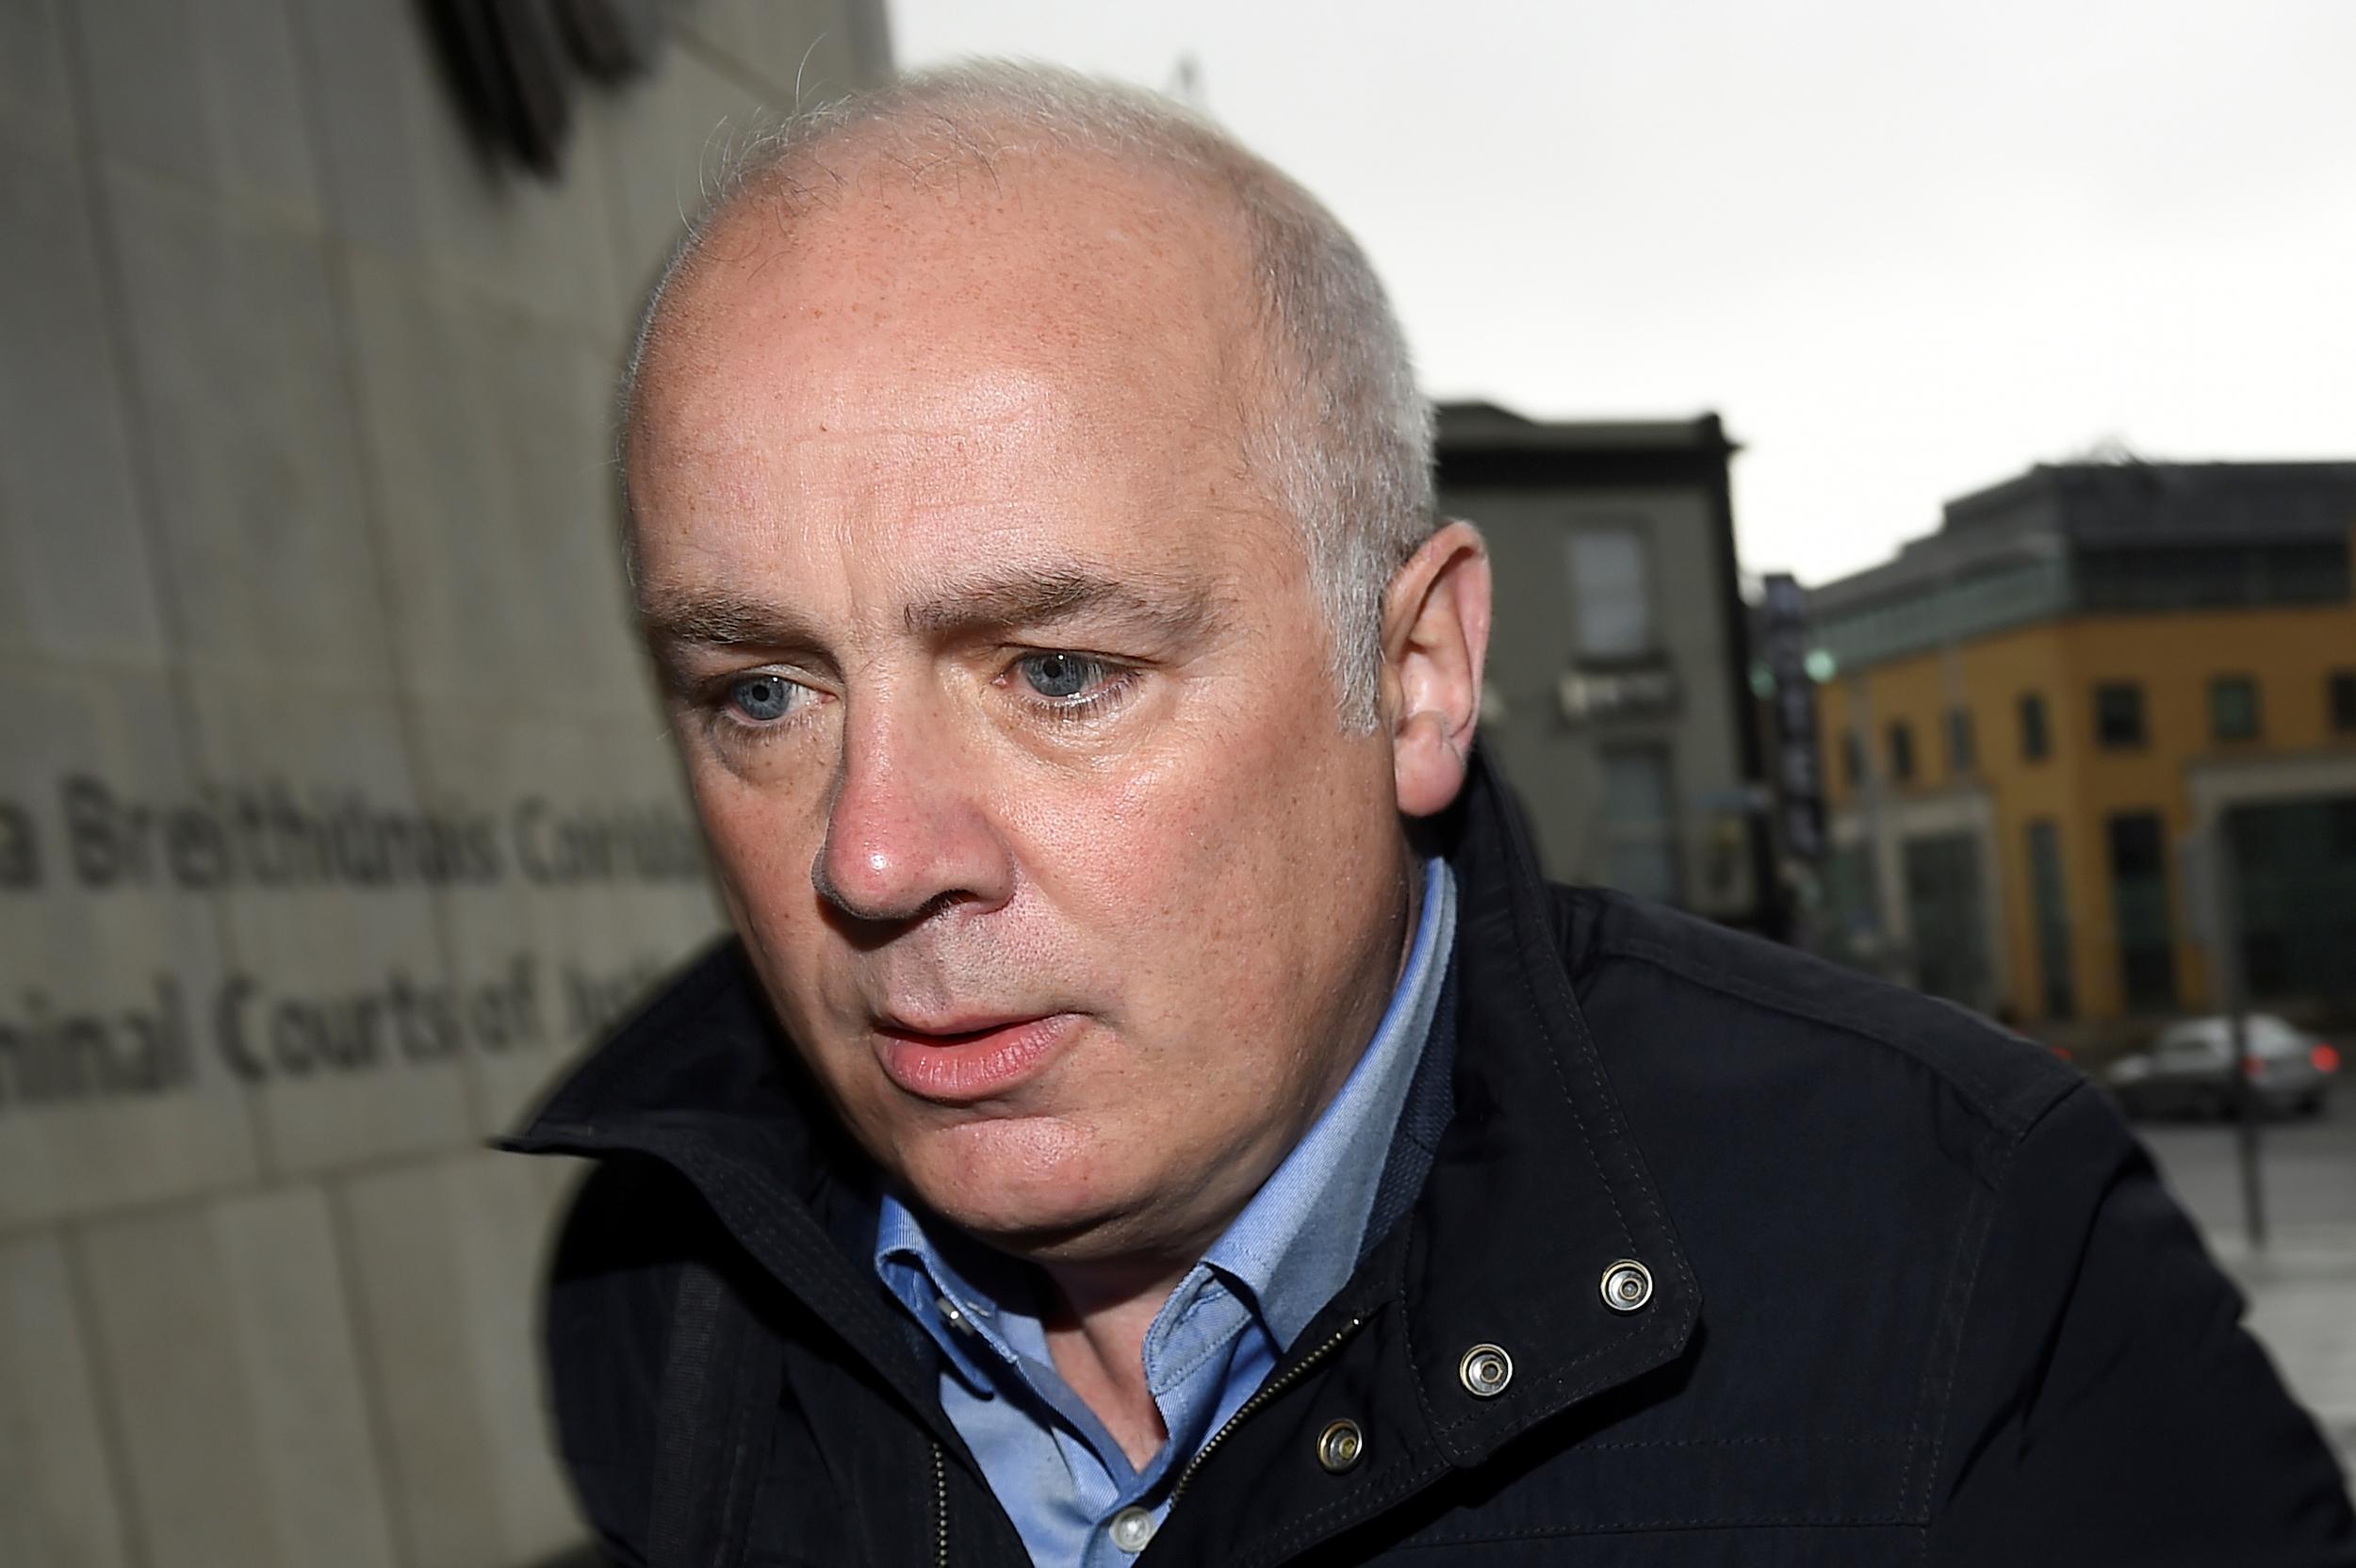 Judge Karen O'Connor said Mr Drumm will be given credit for the five and a half months he served in custody in the United States during his extradition to Ireland in 2015